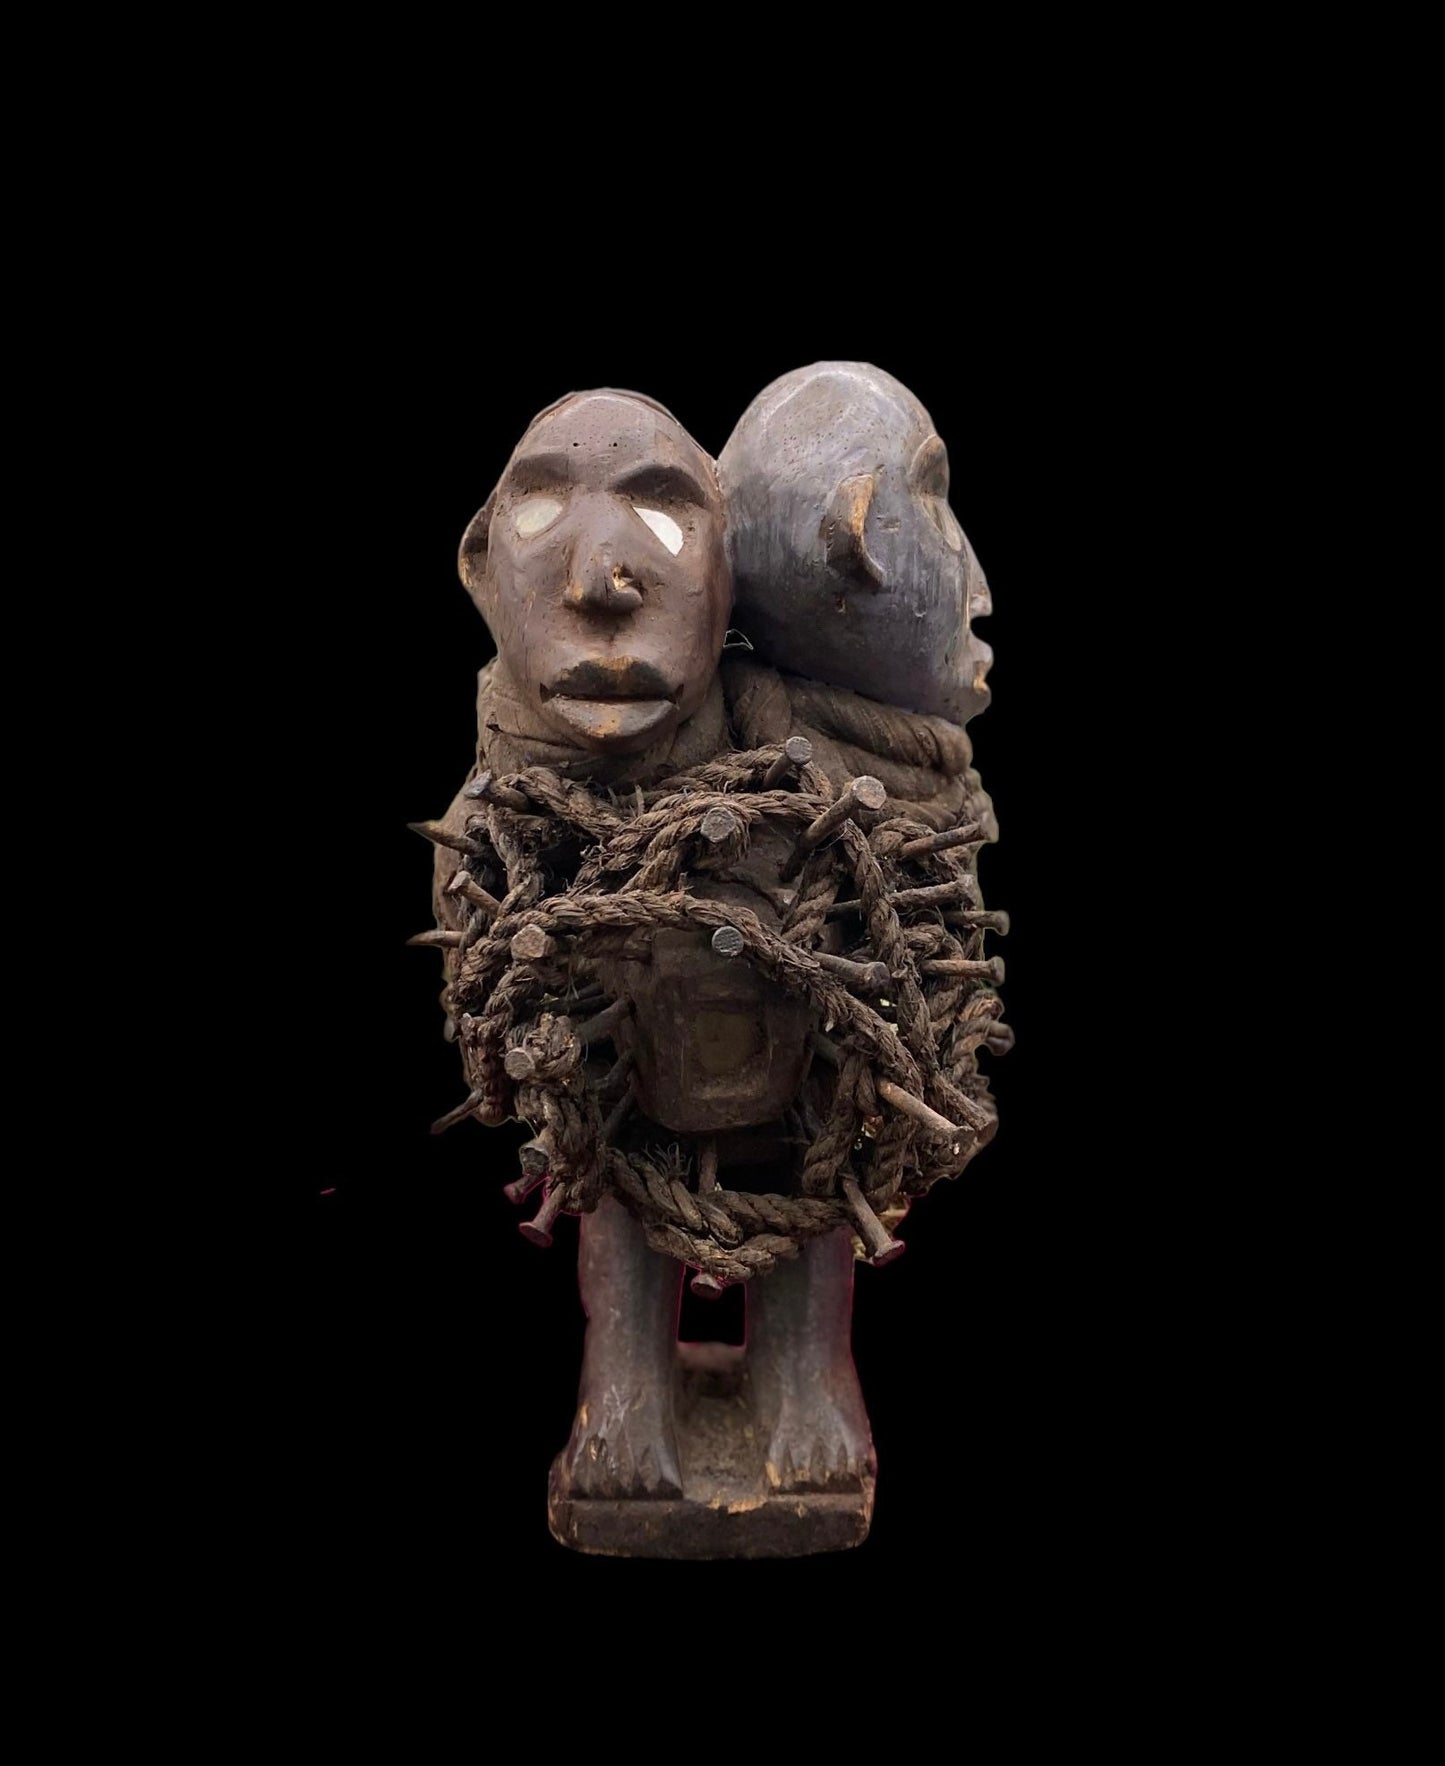 Nkisi Two-Headed with Glass Statue + Shigidi + Fetish from Kongo for Protection + One of a Kind